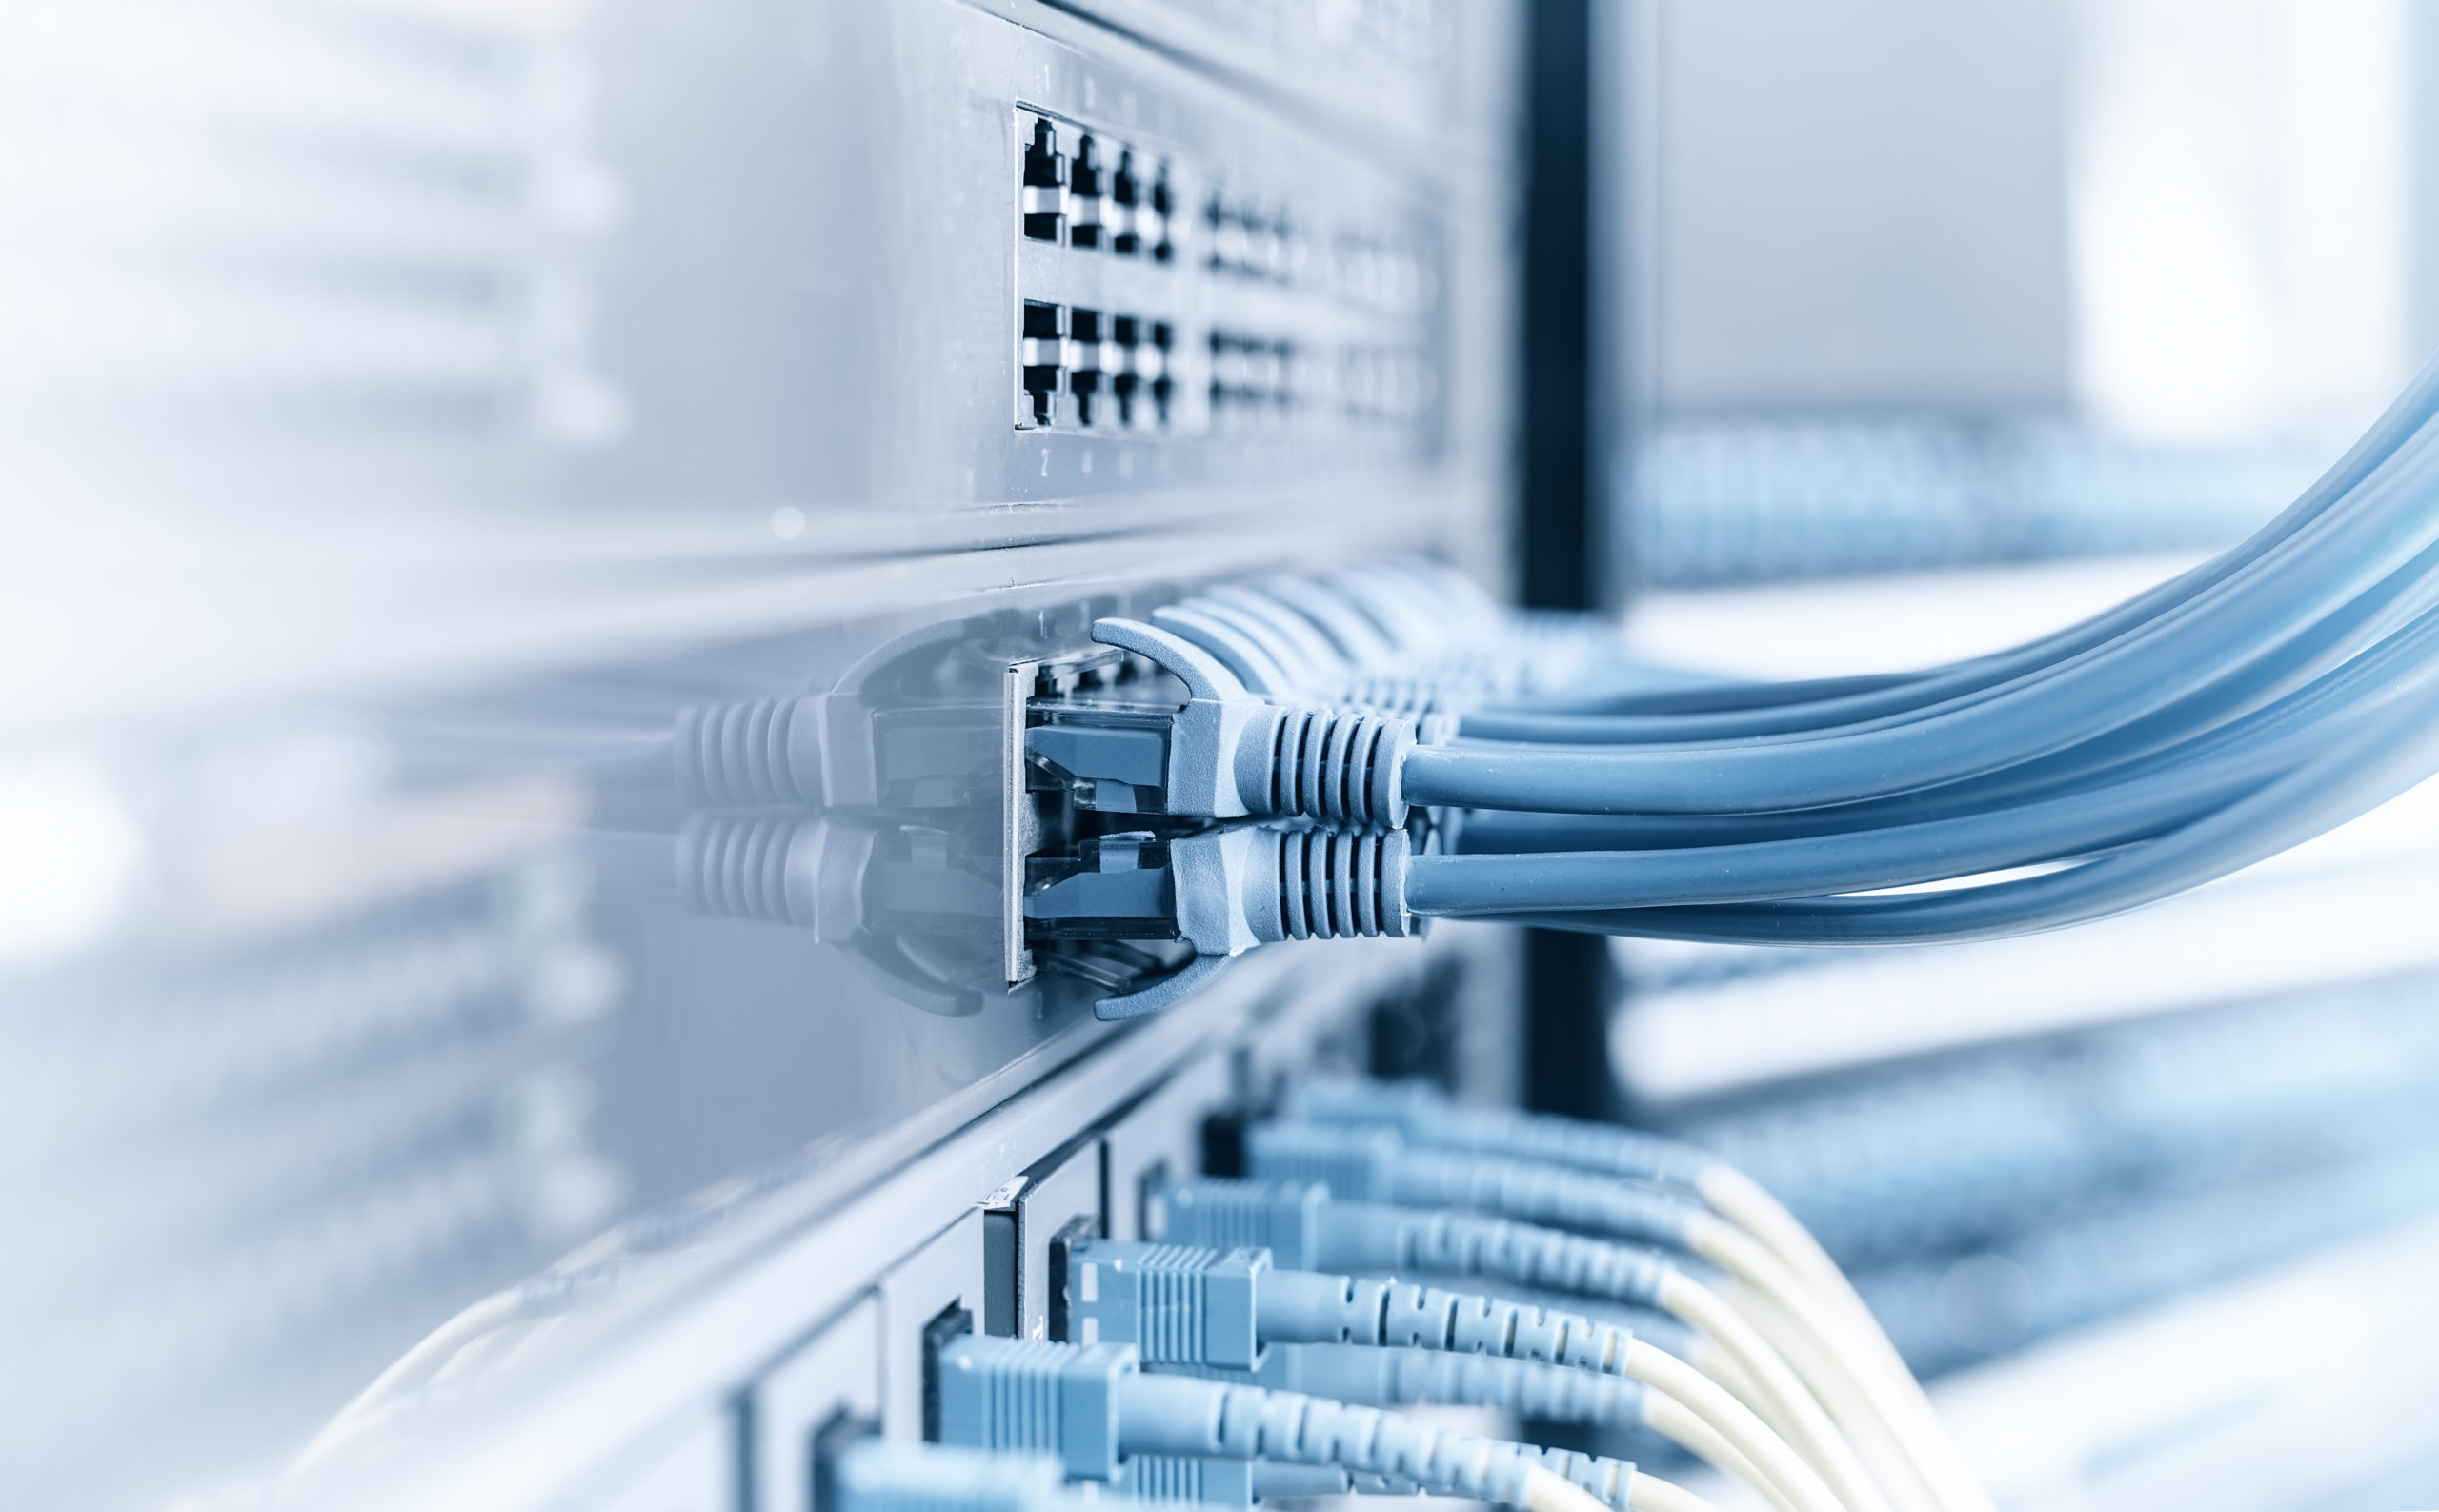 ethernet cable on network switches background image